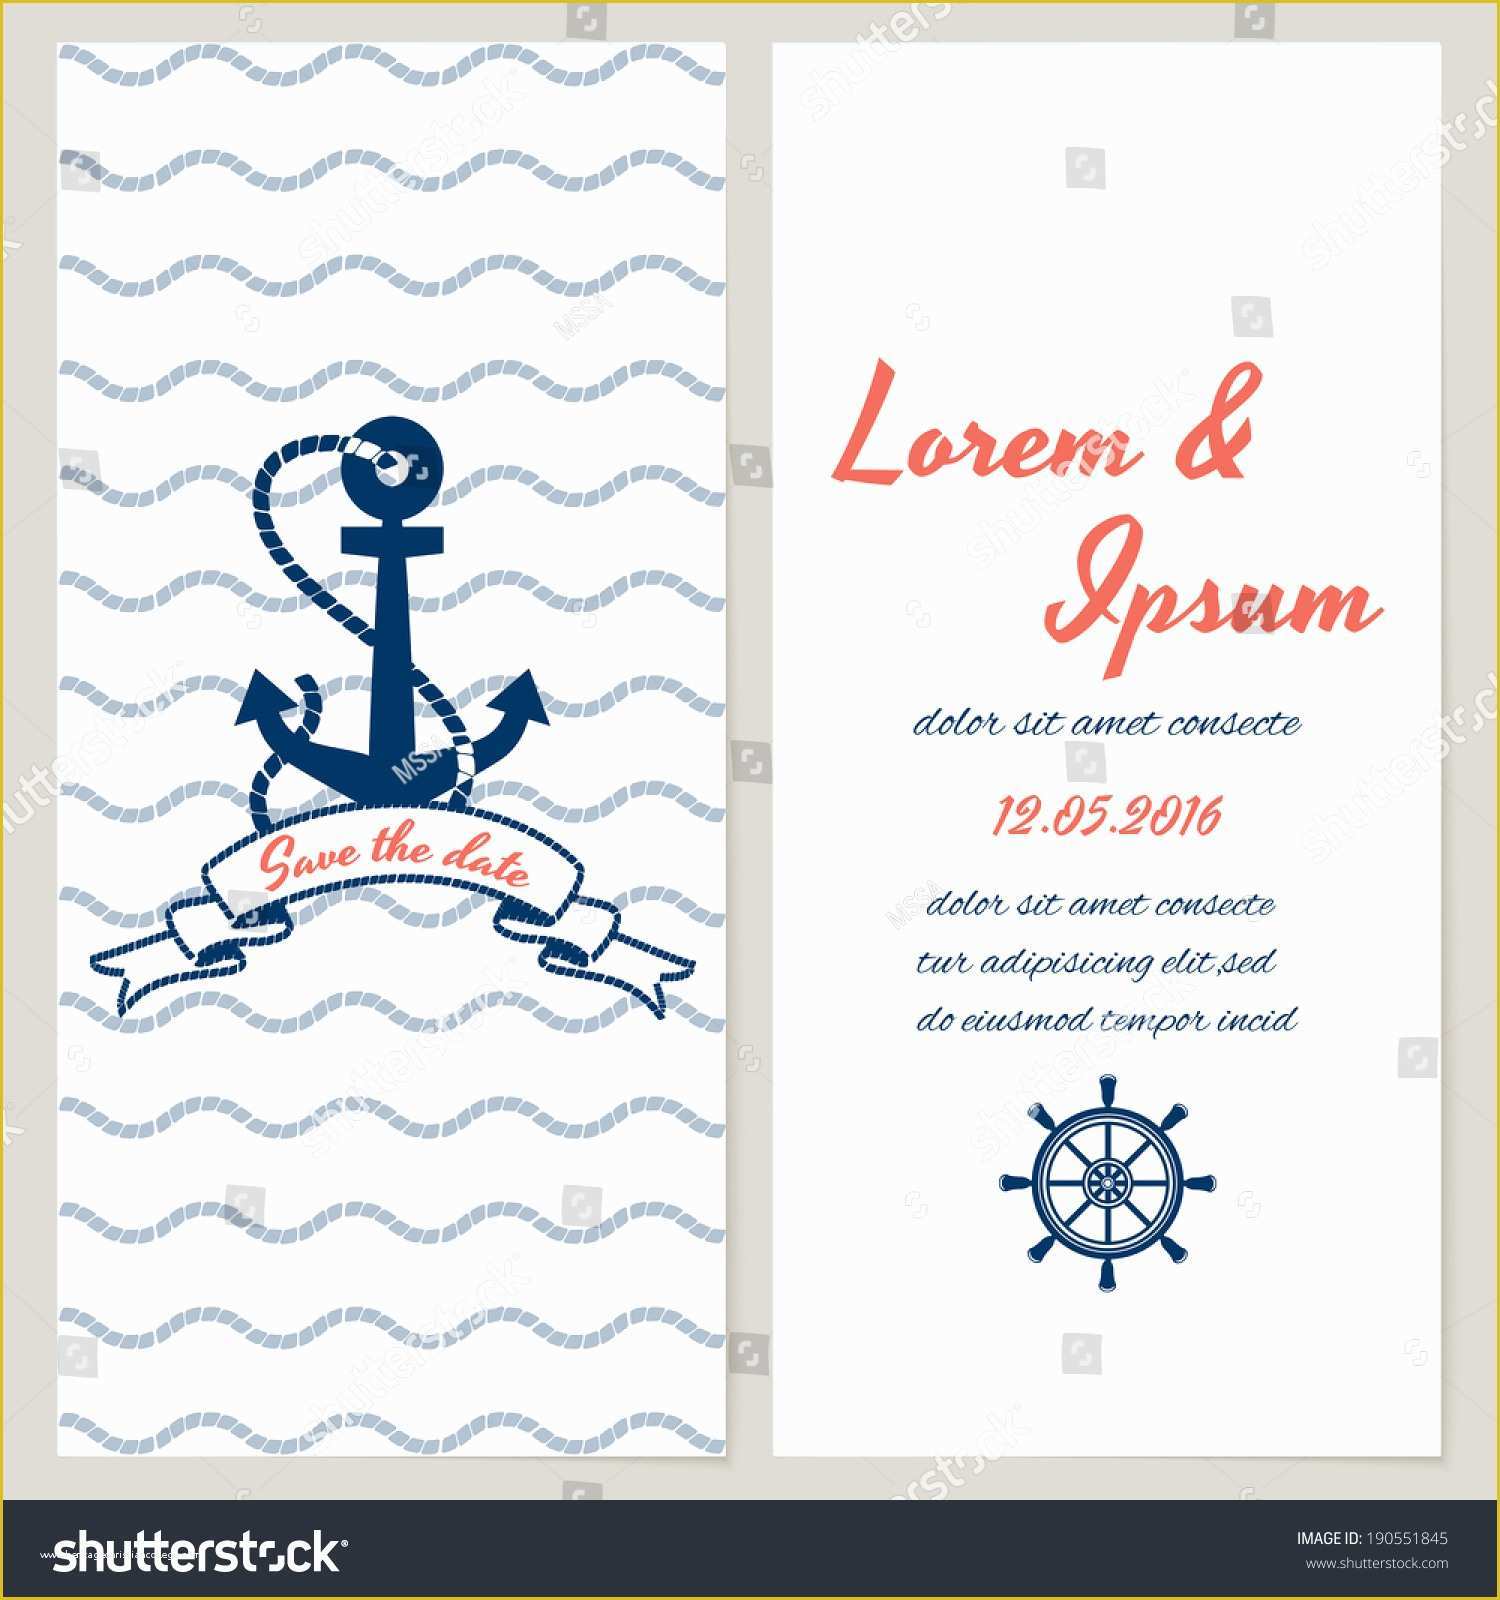 Free Nautical Invitation Templates Of Nautical Style Wedding Invitation and Save the Date